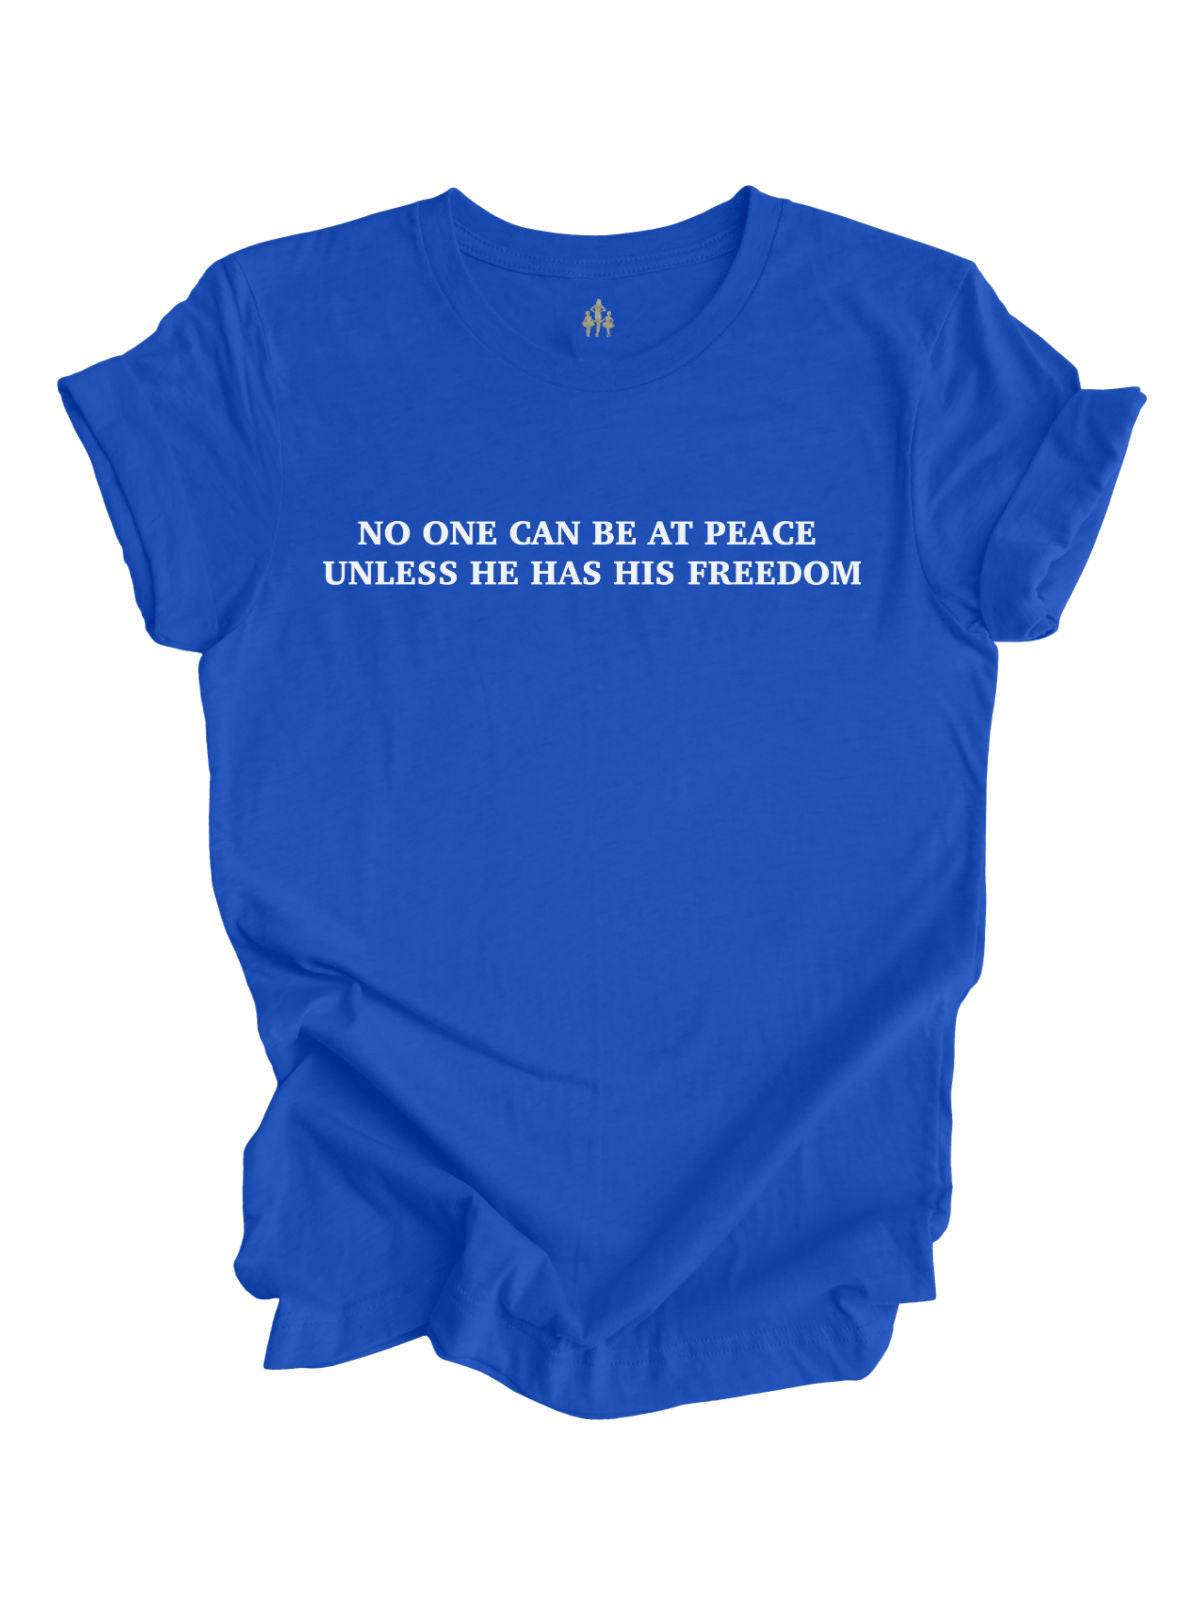 No One Can Be at Peace Juneteenth Shirt in Blue